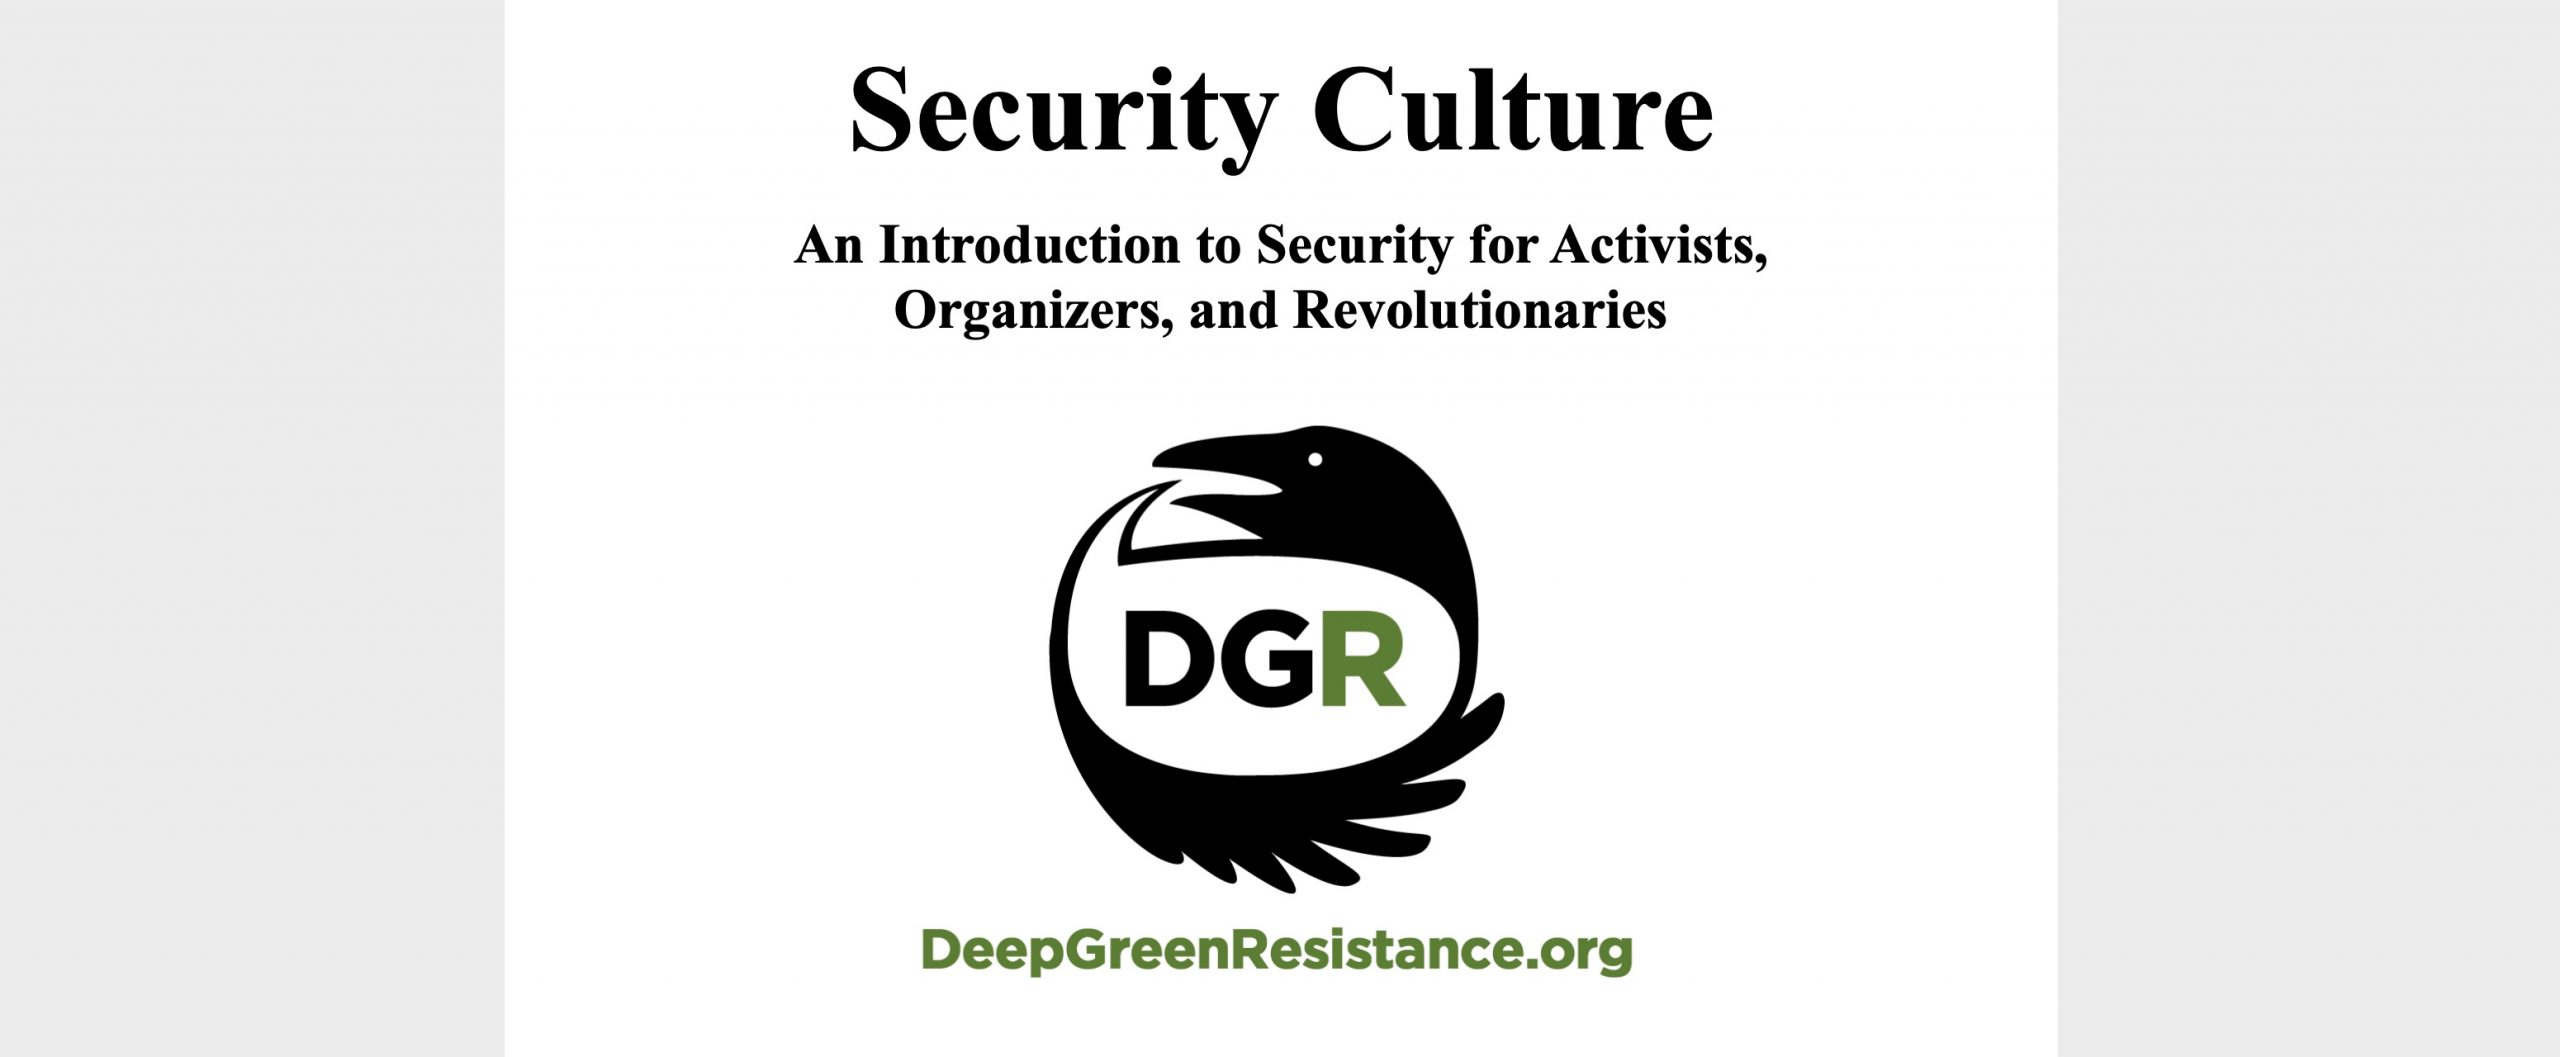 An Introduction to Security for Activists, Organizers, and Revolutionaries